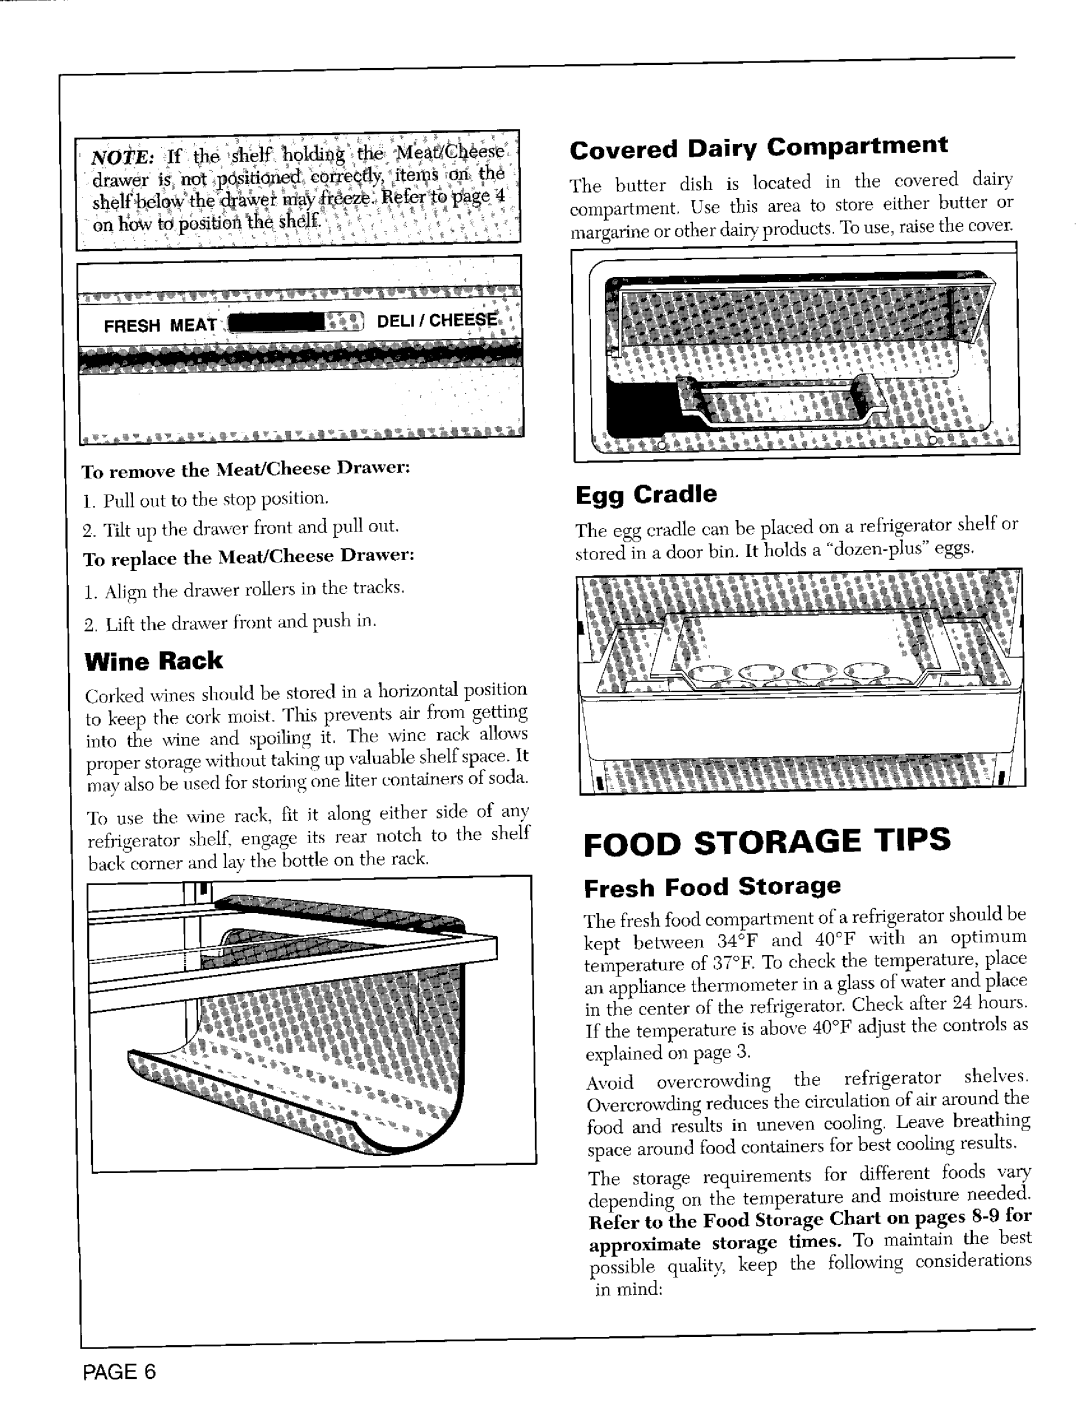 Whirlpool RSD2000, RSD2200 Wine Rack, Egg Cradle, Fresh Food Storage, Covered Dairy Compartment, ont/owto Doatiofime snell 